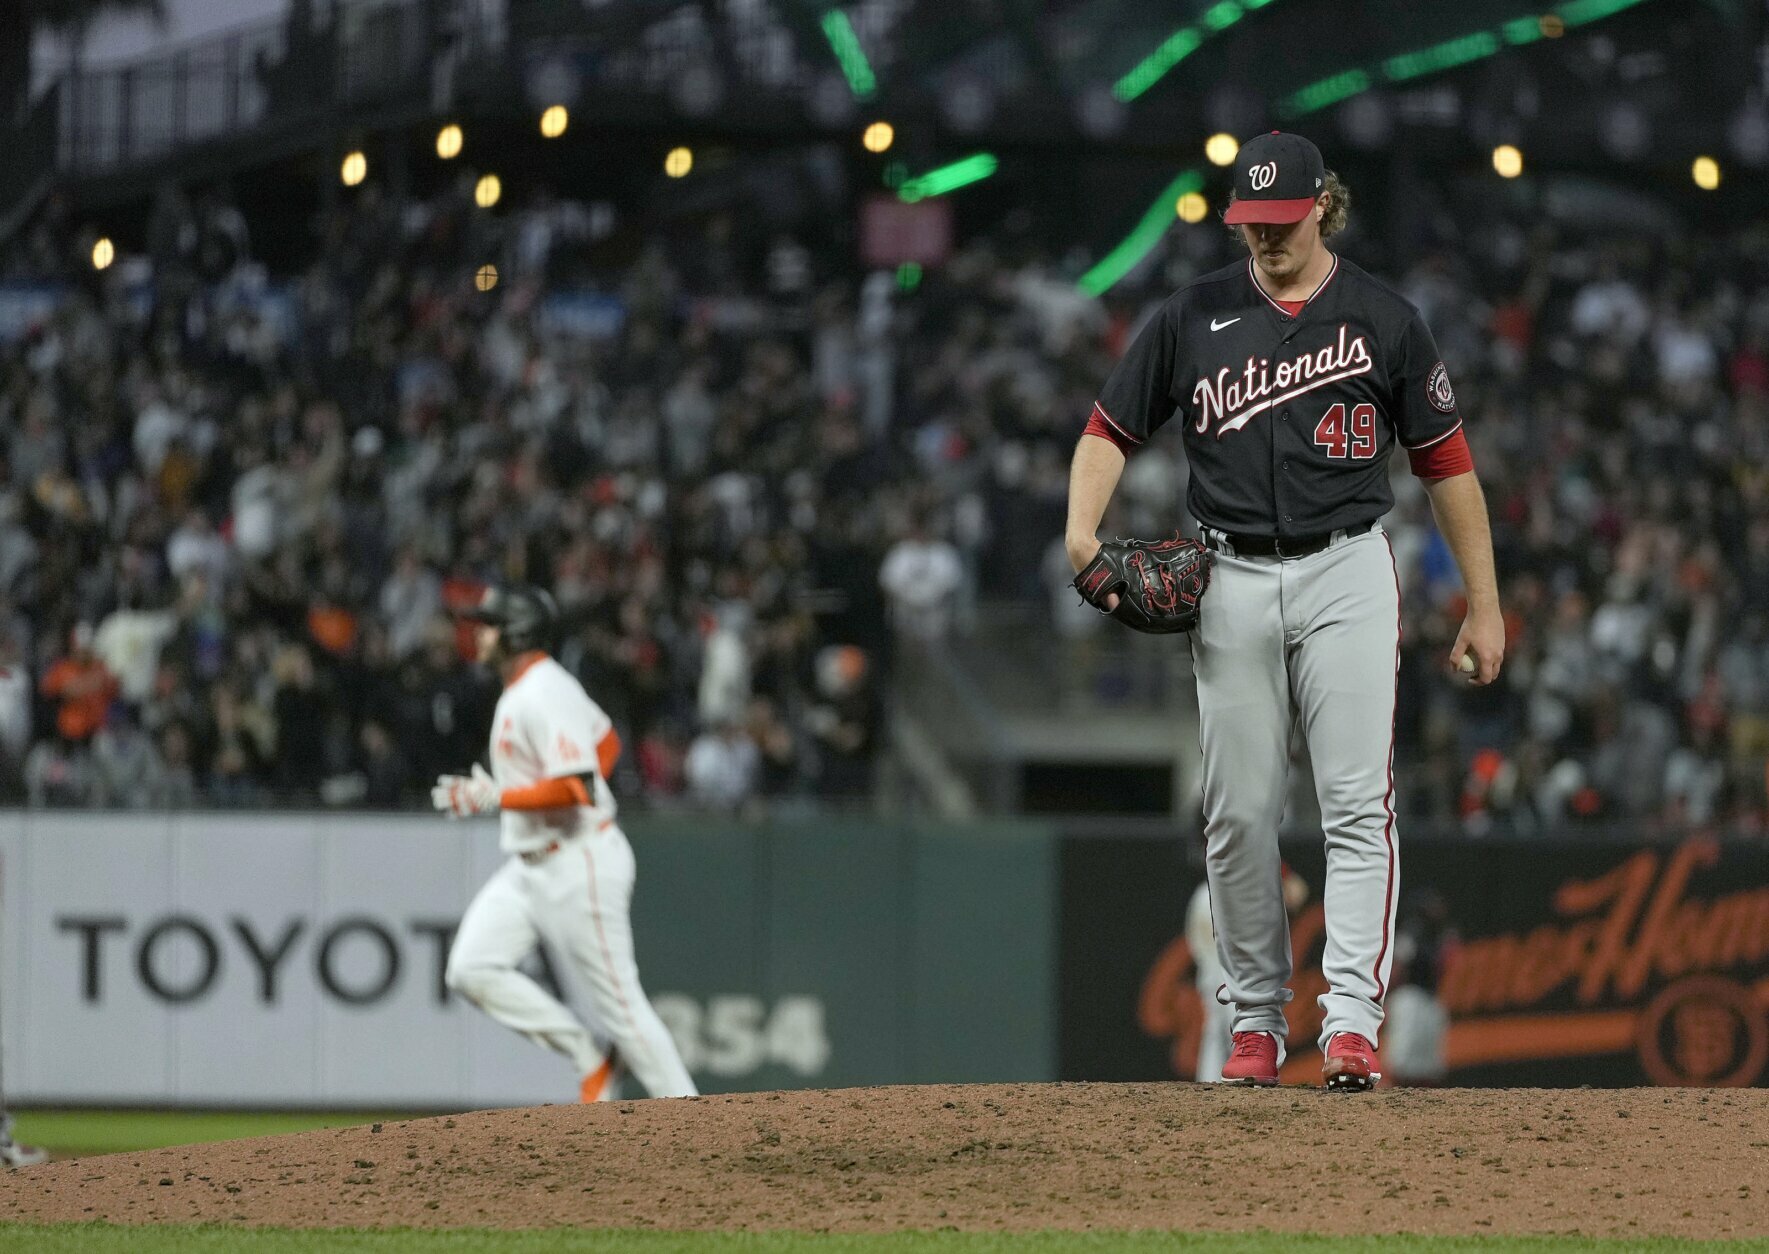 Nationals close out road trip with three-game series at Giants, by  Nationals Communications